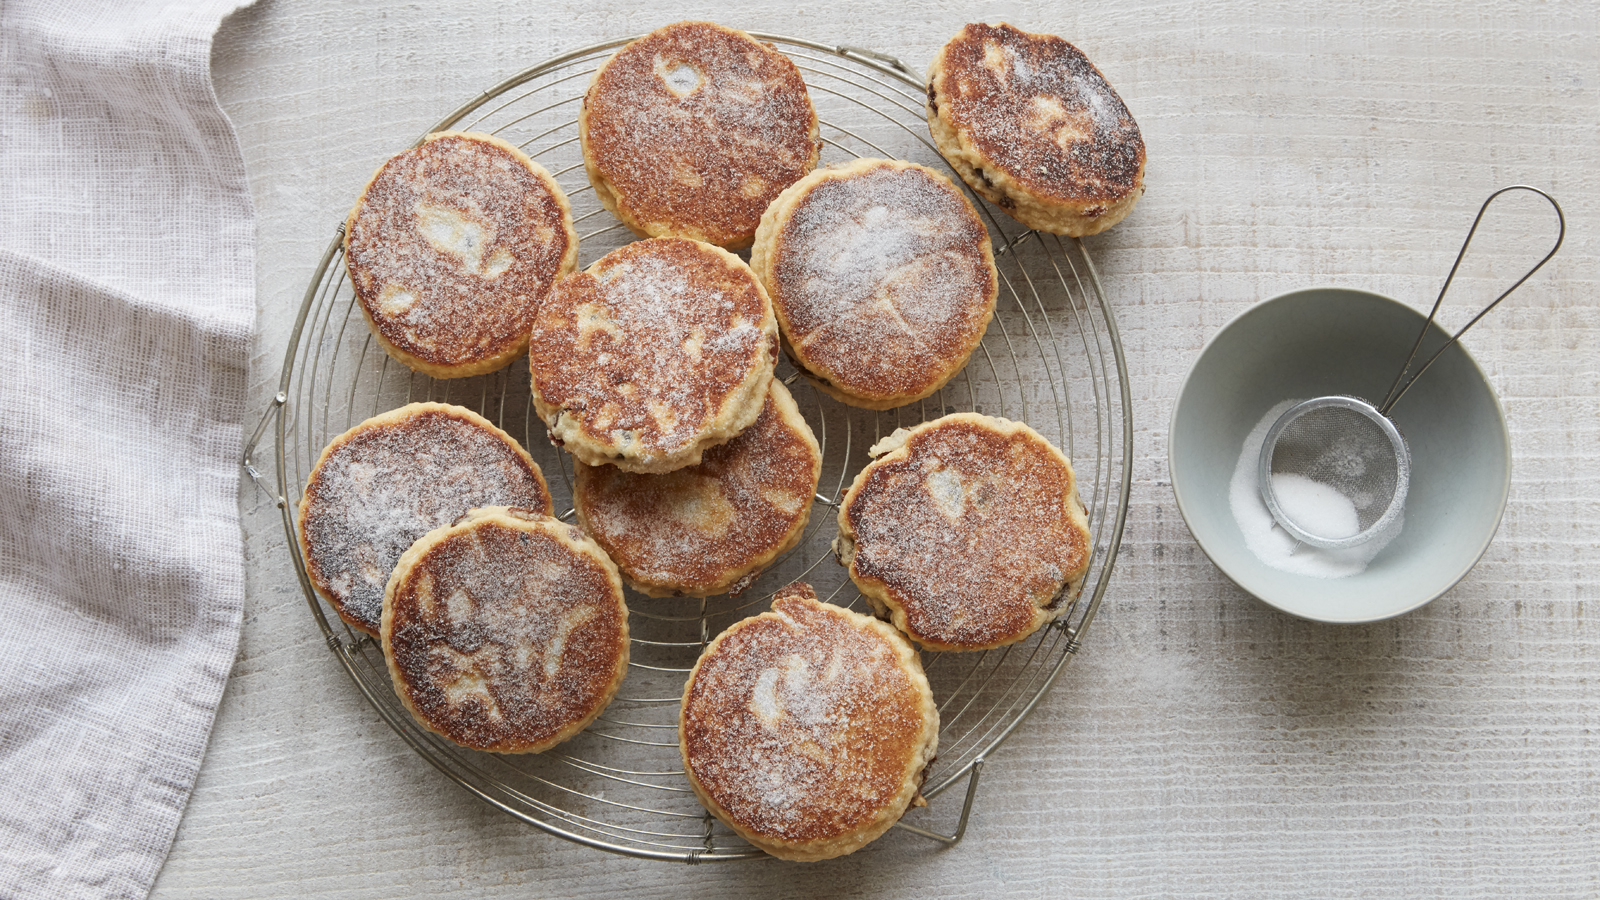 🍰 We Know Which Cake Represents Your Personality Based on the Bakery Items You Choose Welsh Cakes